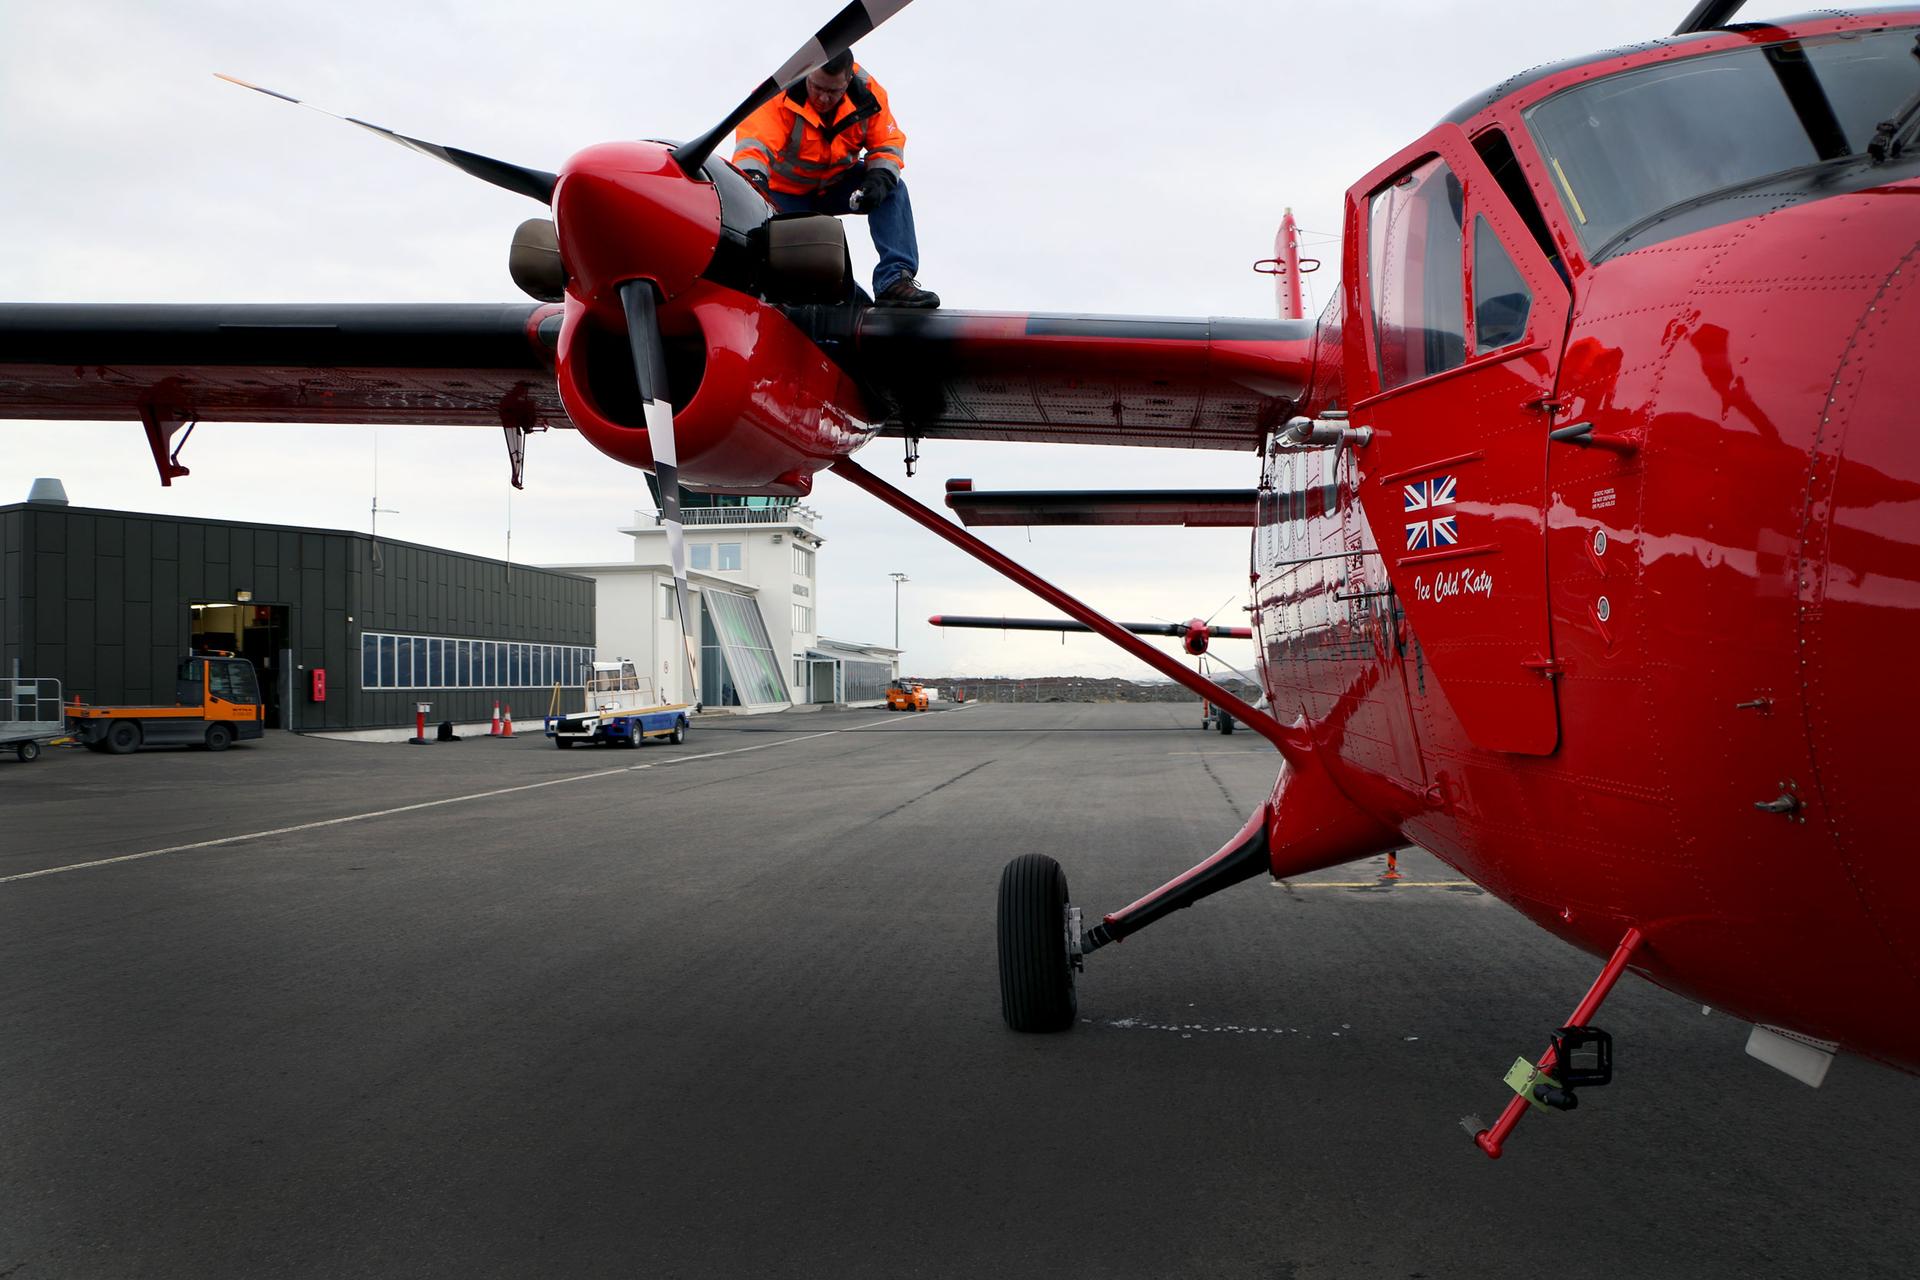 A man is perched atop a propeller of a small twin engine plane on a tarmac. The plane is bright cherry red.